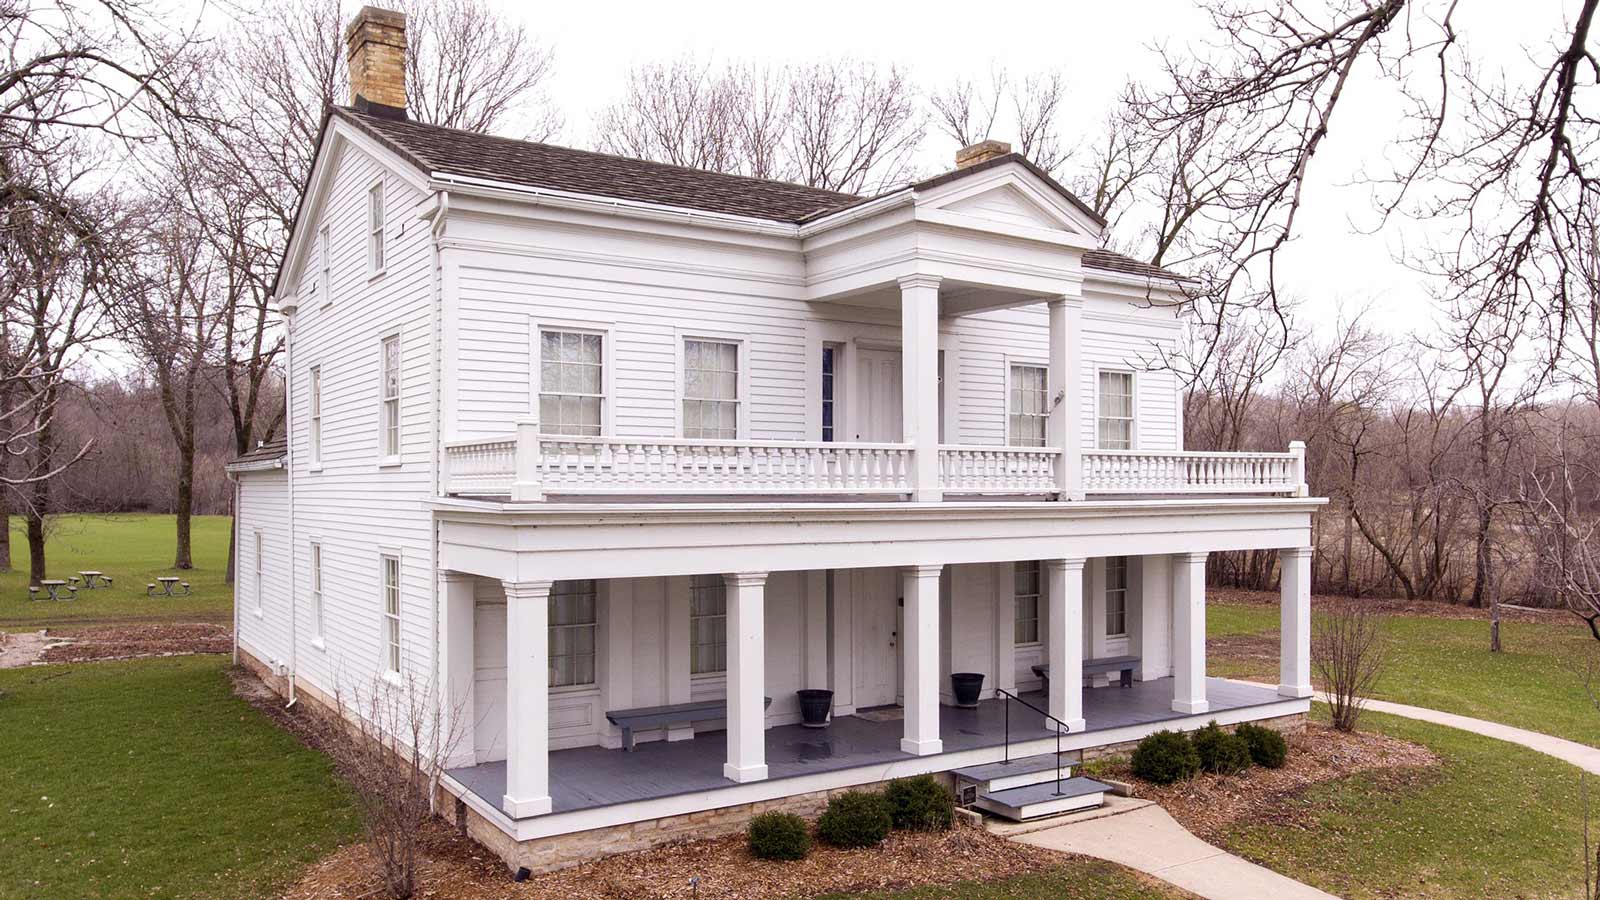 Grignon Mansion in Kaukauna, a historic site used to teach American history 